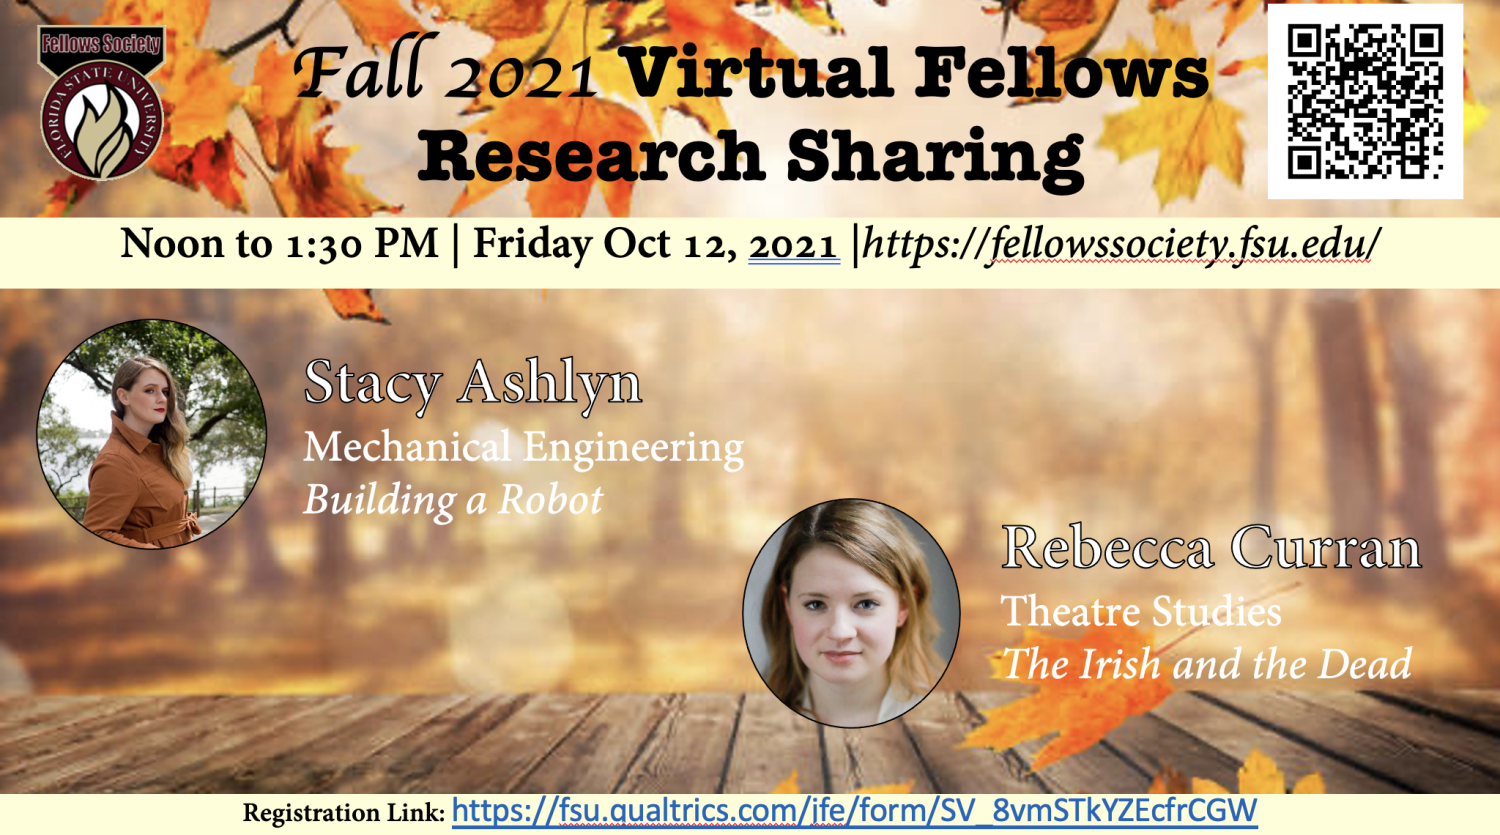 November Research Sharing Luncheon Friday 11/12 from noon to 1:30 PM. Featuring research by: Stacy Ashlyn Mechanical Engineering "Building a Robot" and Rebecca Curran Theatre Studies "The Irish and the Dead" Register here:https://fsu.qualtrics.com/jfe/form/SV_8vmSTkYZEcfrCGW